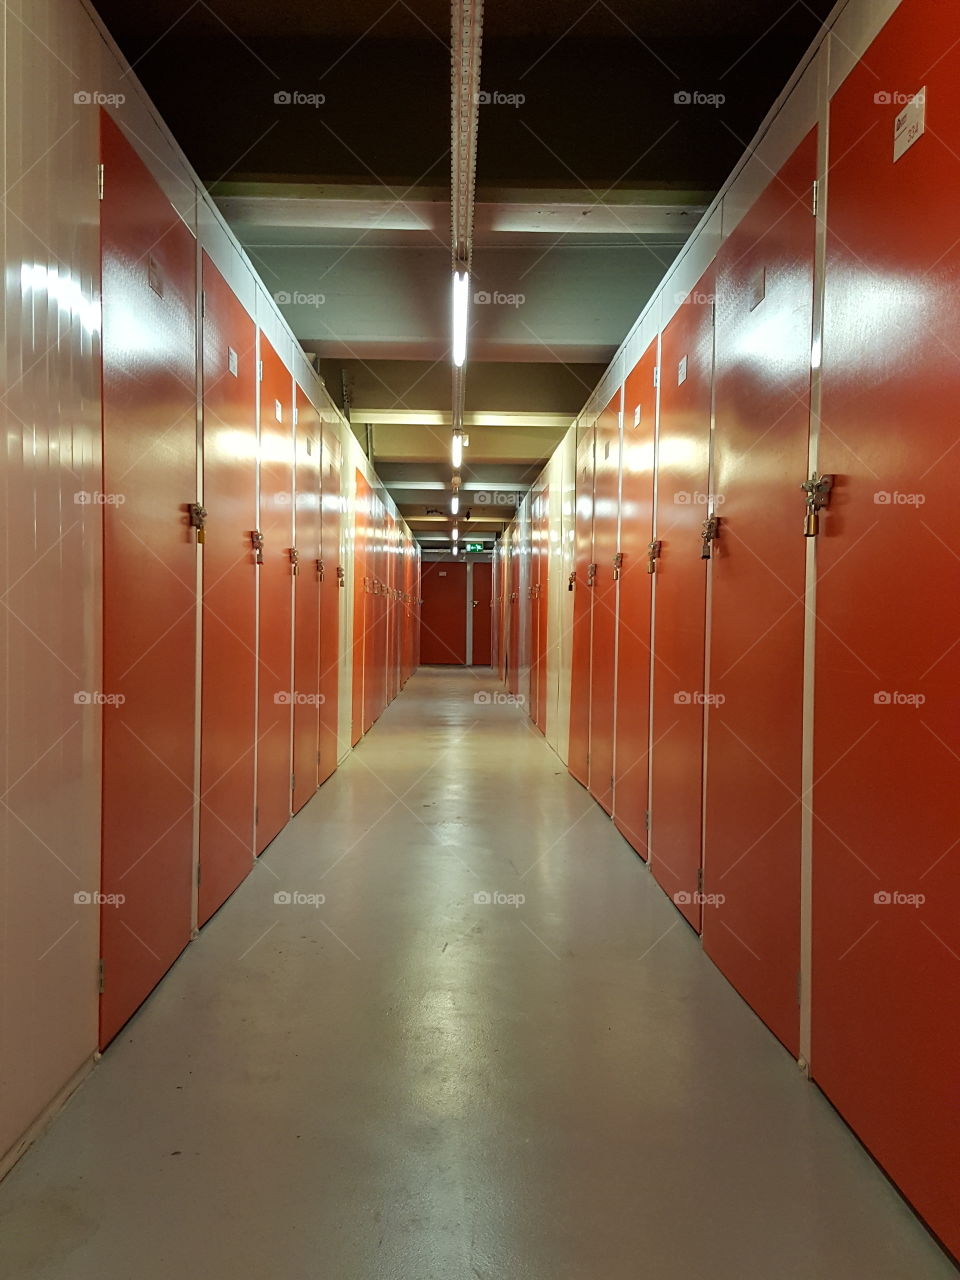 Long corridor with storage rooms in a storage facility